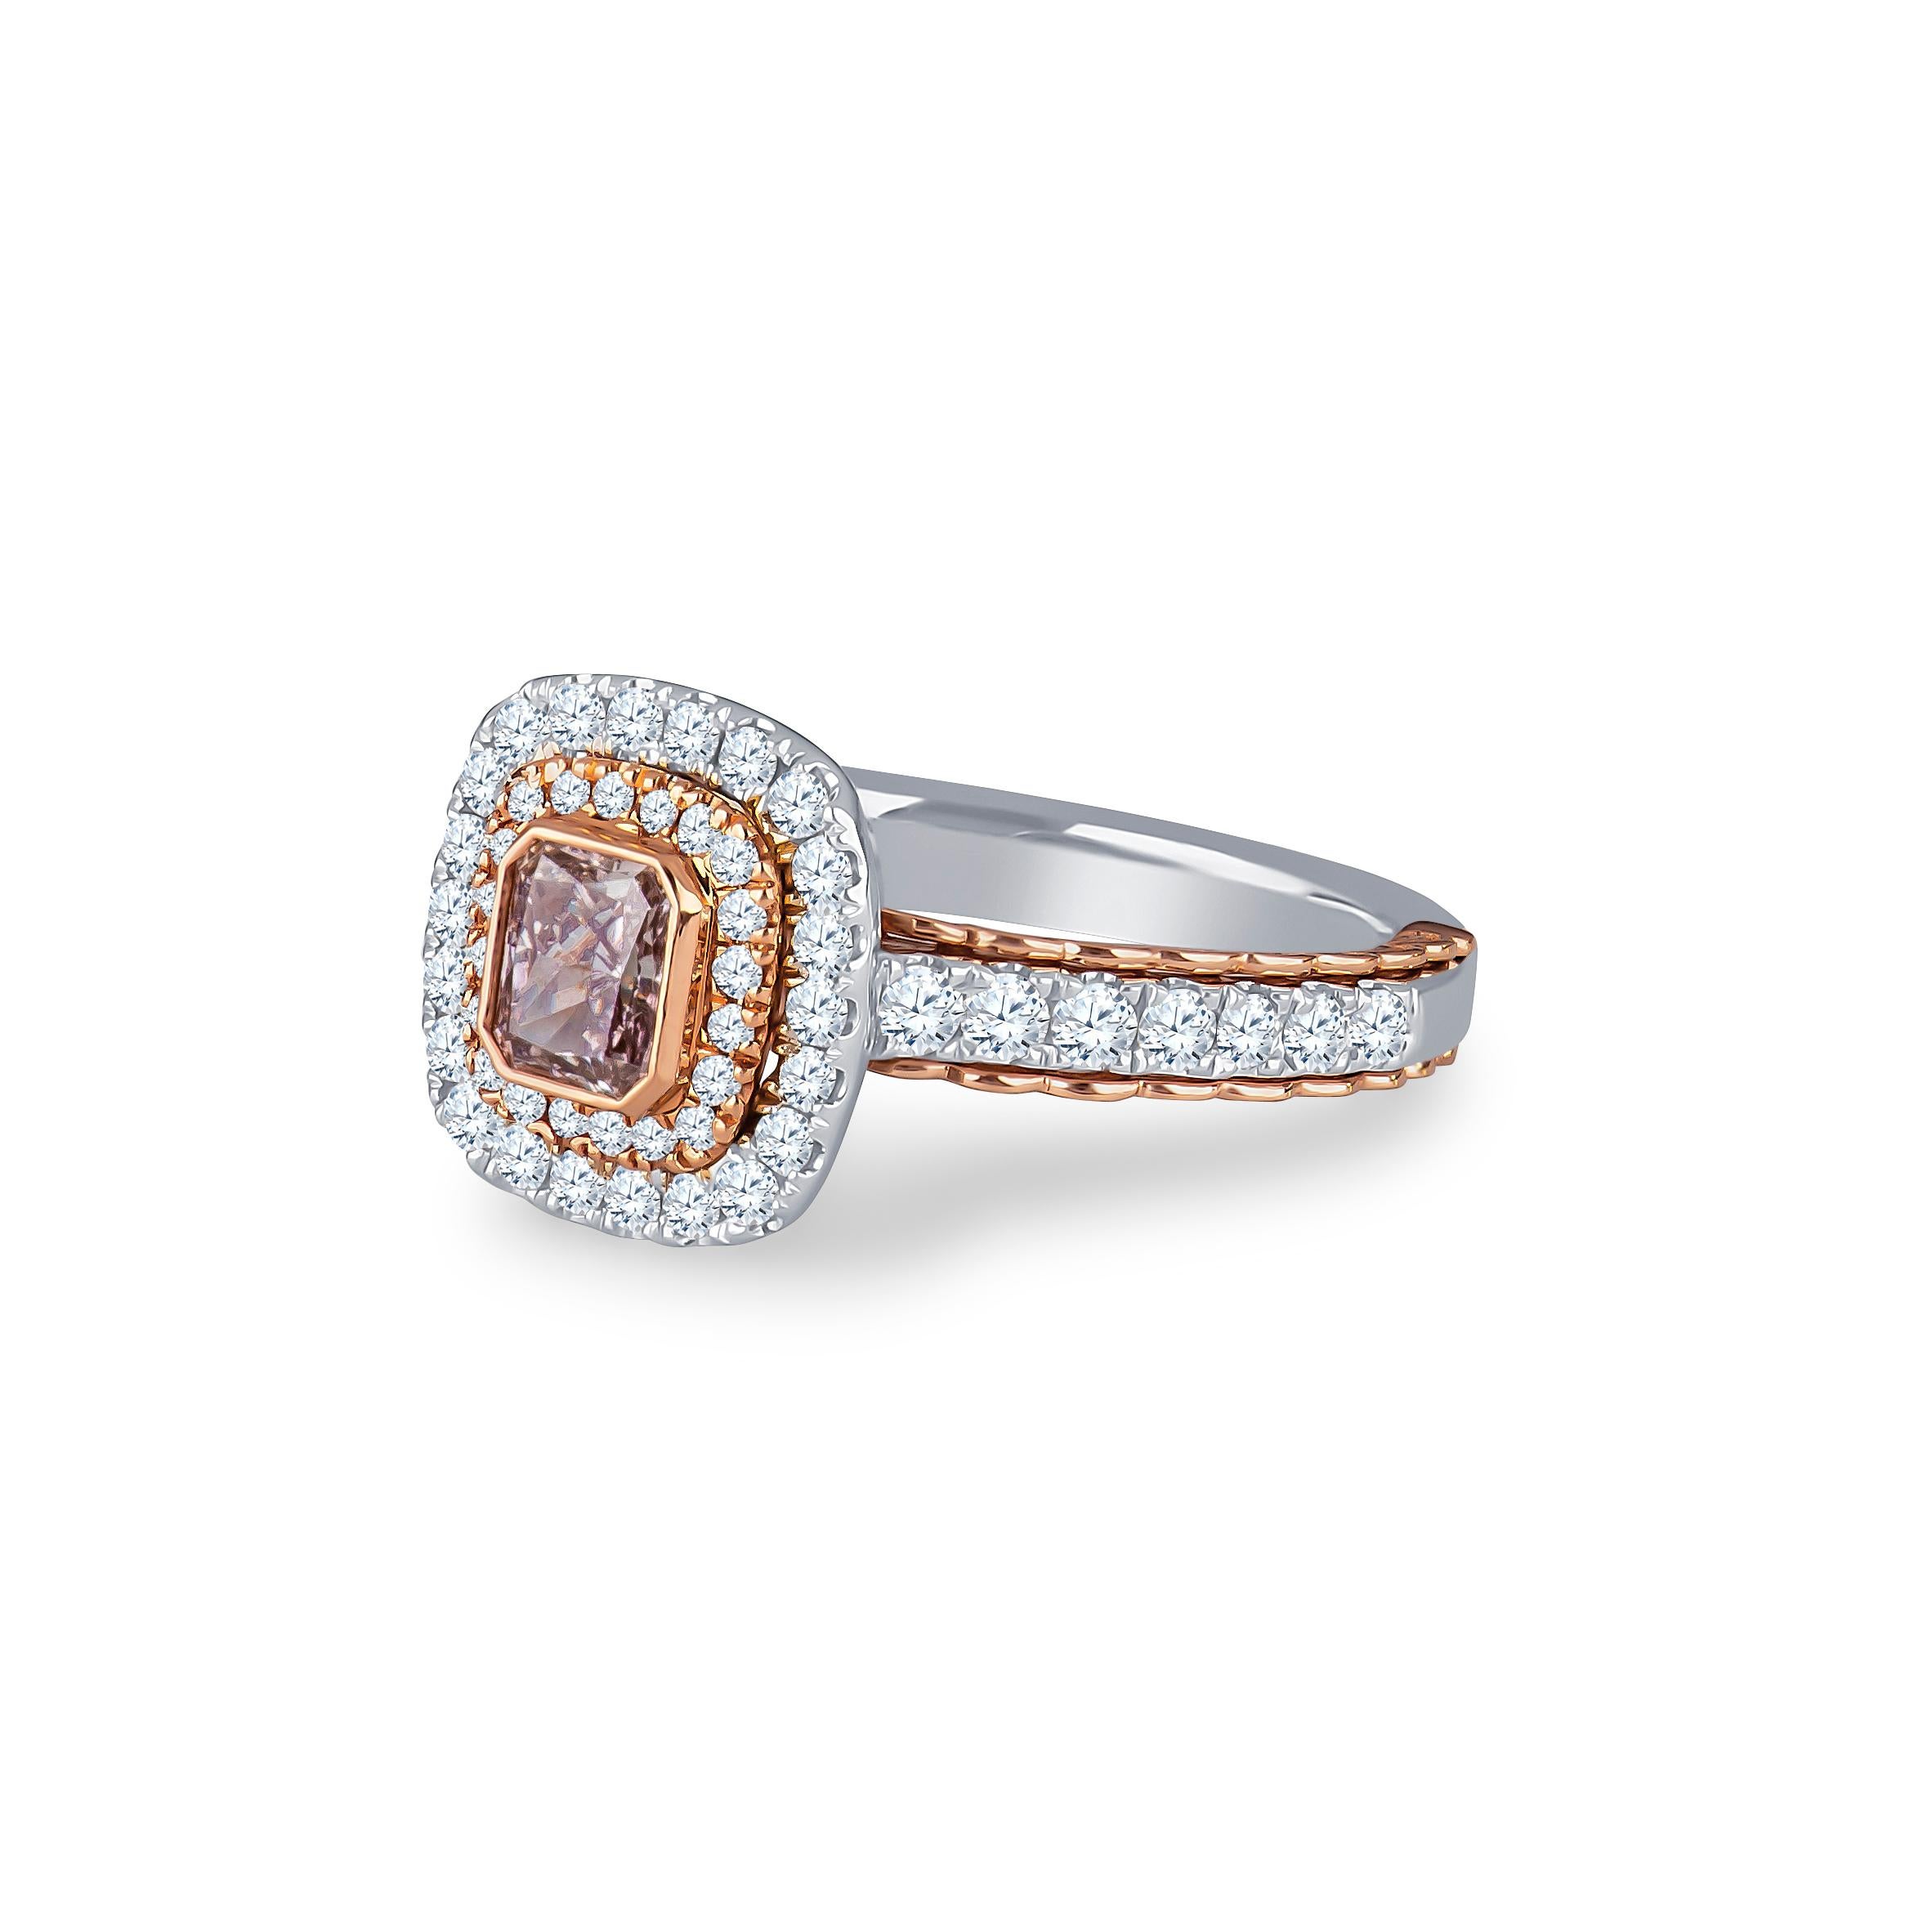 14 Karat white and rose gold double cushion shape halo, cathedral diamond semi-mount with 0.72 carats total weight of round brilliant  prong set diamonds and one bezel set 0.62 Radiant cut natural fancy brownish purple-pink. Ring size 7 but